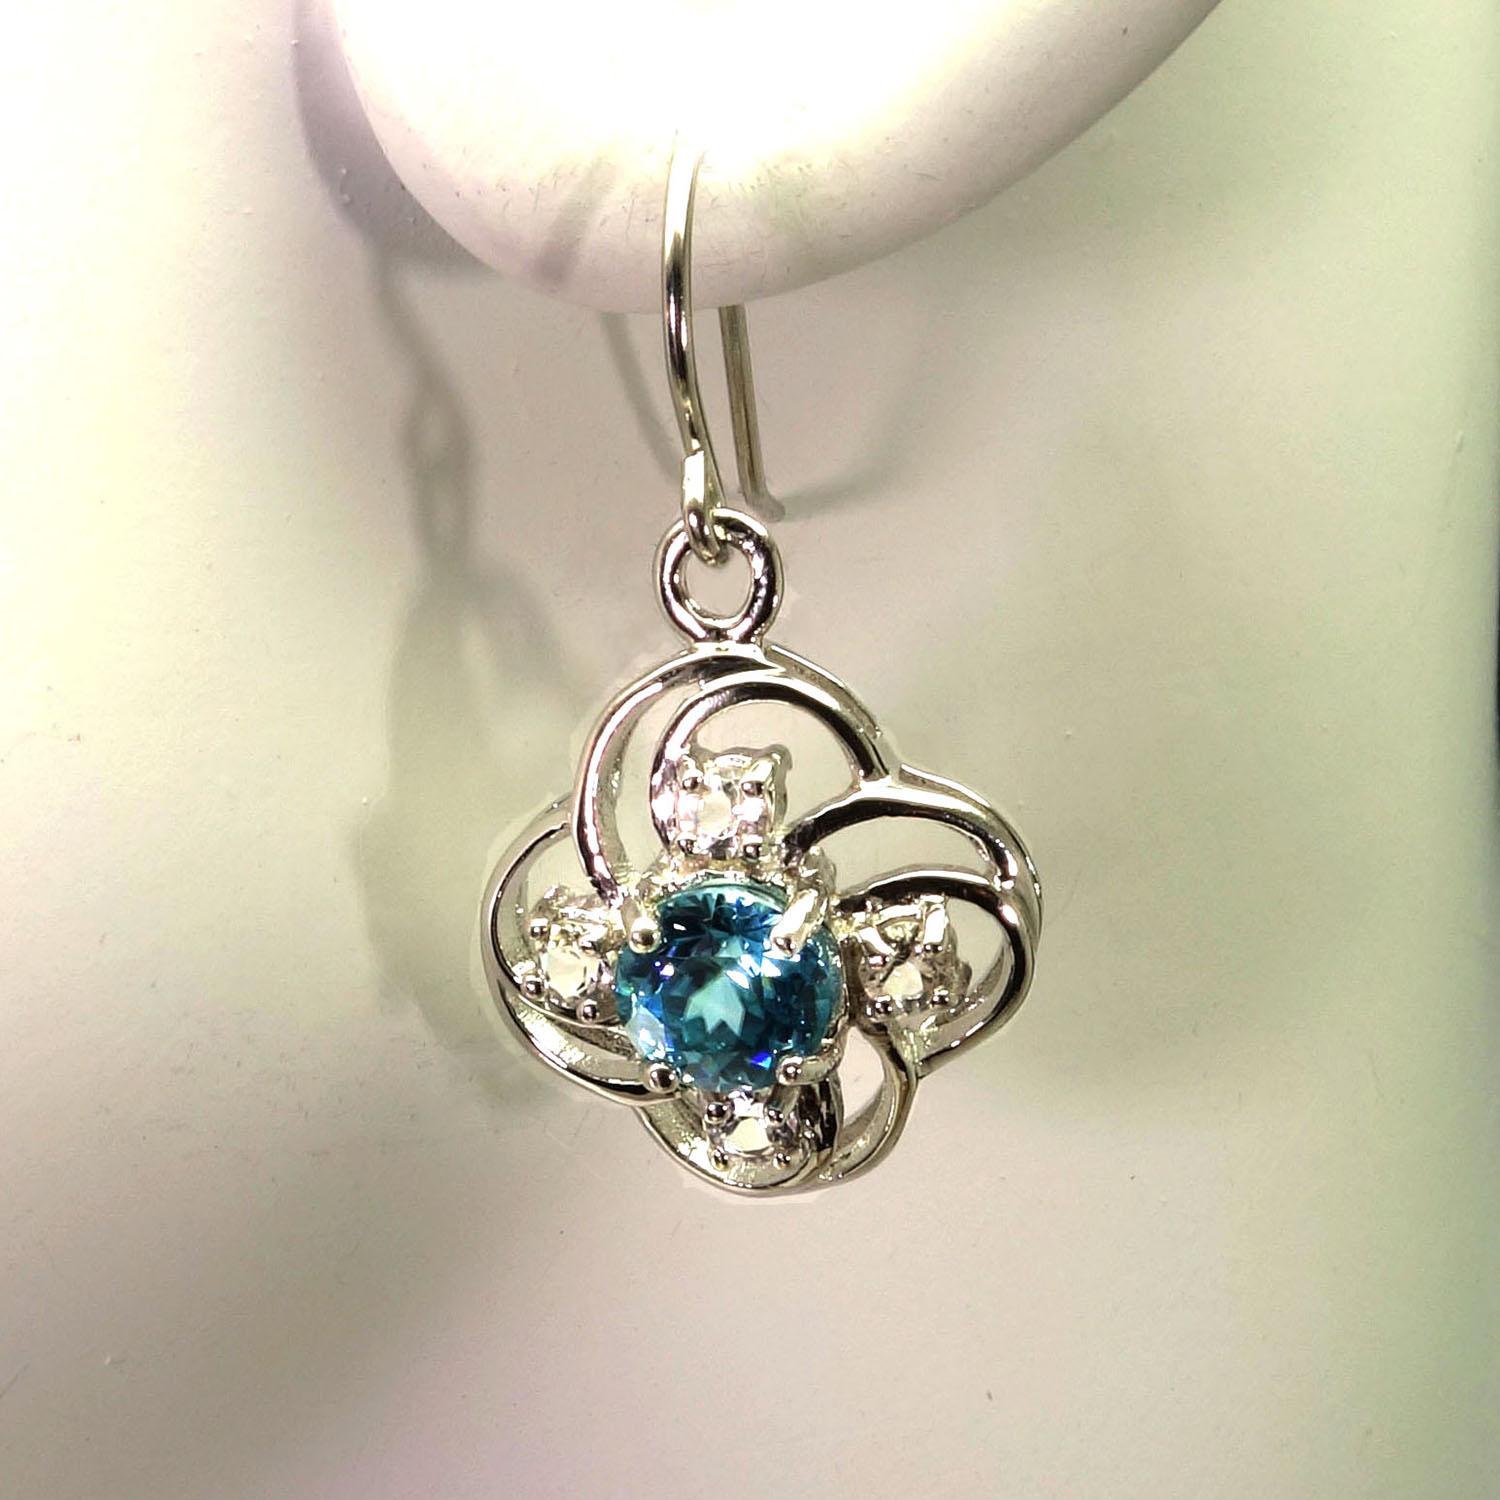 These unique earrings are perfect to wear while you're teleconferencing!  And, they are available for immediate shipment.
Earrings of Swirling Sterling Silver Flower motifs featuring sparkling Blue Cambodian Zircons. The round 2.8ct Blue Zircons are